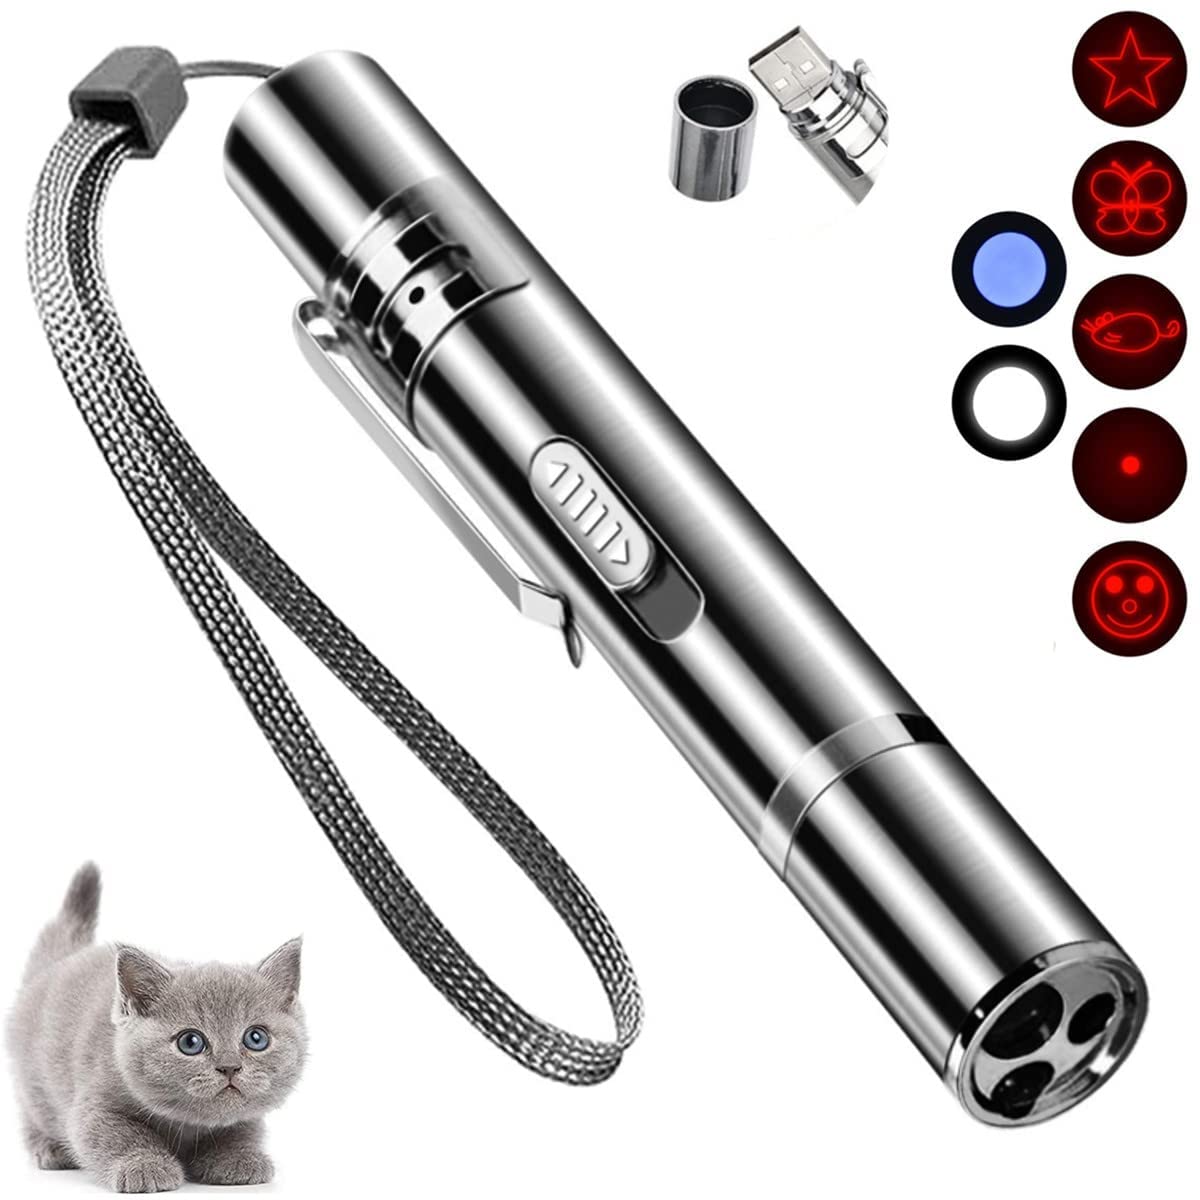 Cat Laser Toy, Laser Pointer Interactive Toys for Indoor Cats Dogs, Red Dot Light Lazer Pointer, Long Range 3 Mode USB Rechargeable Pet Kitten Chase Exercise Toy, Small Laser Presentation Clicker Pen